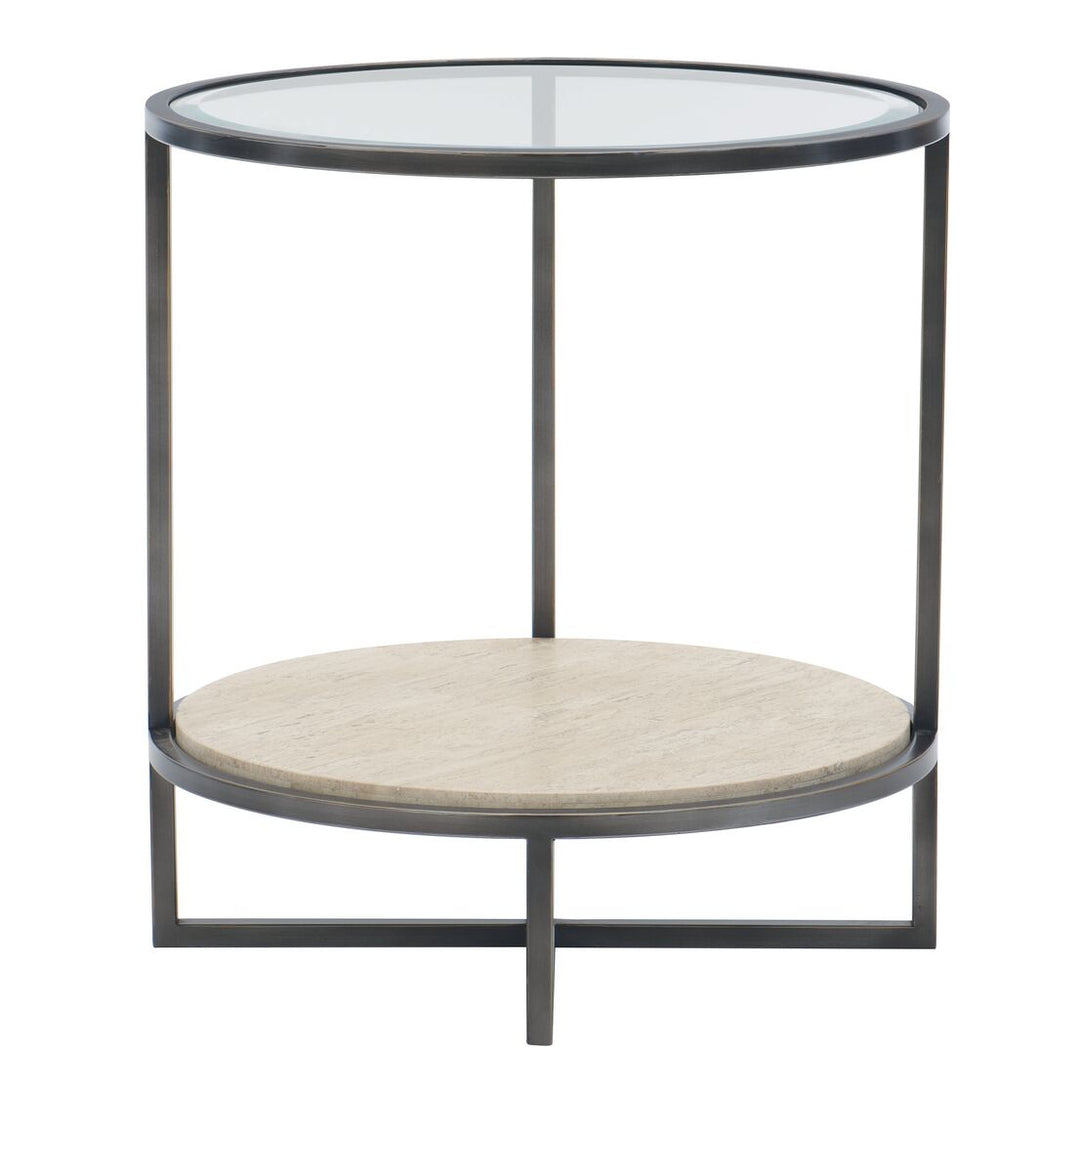 HARLOW CHAIRSIDE TABLE